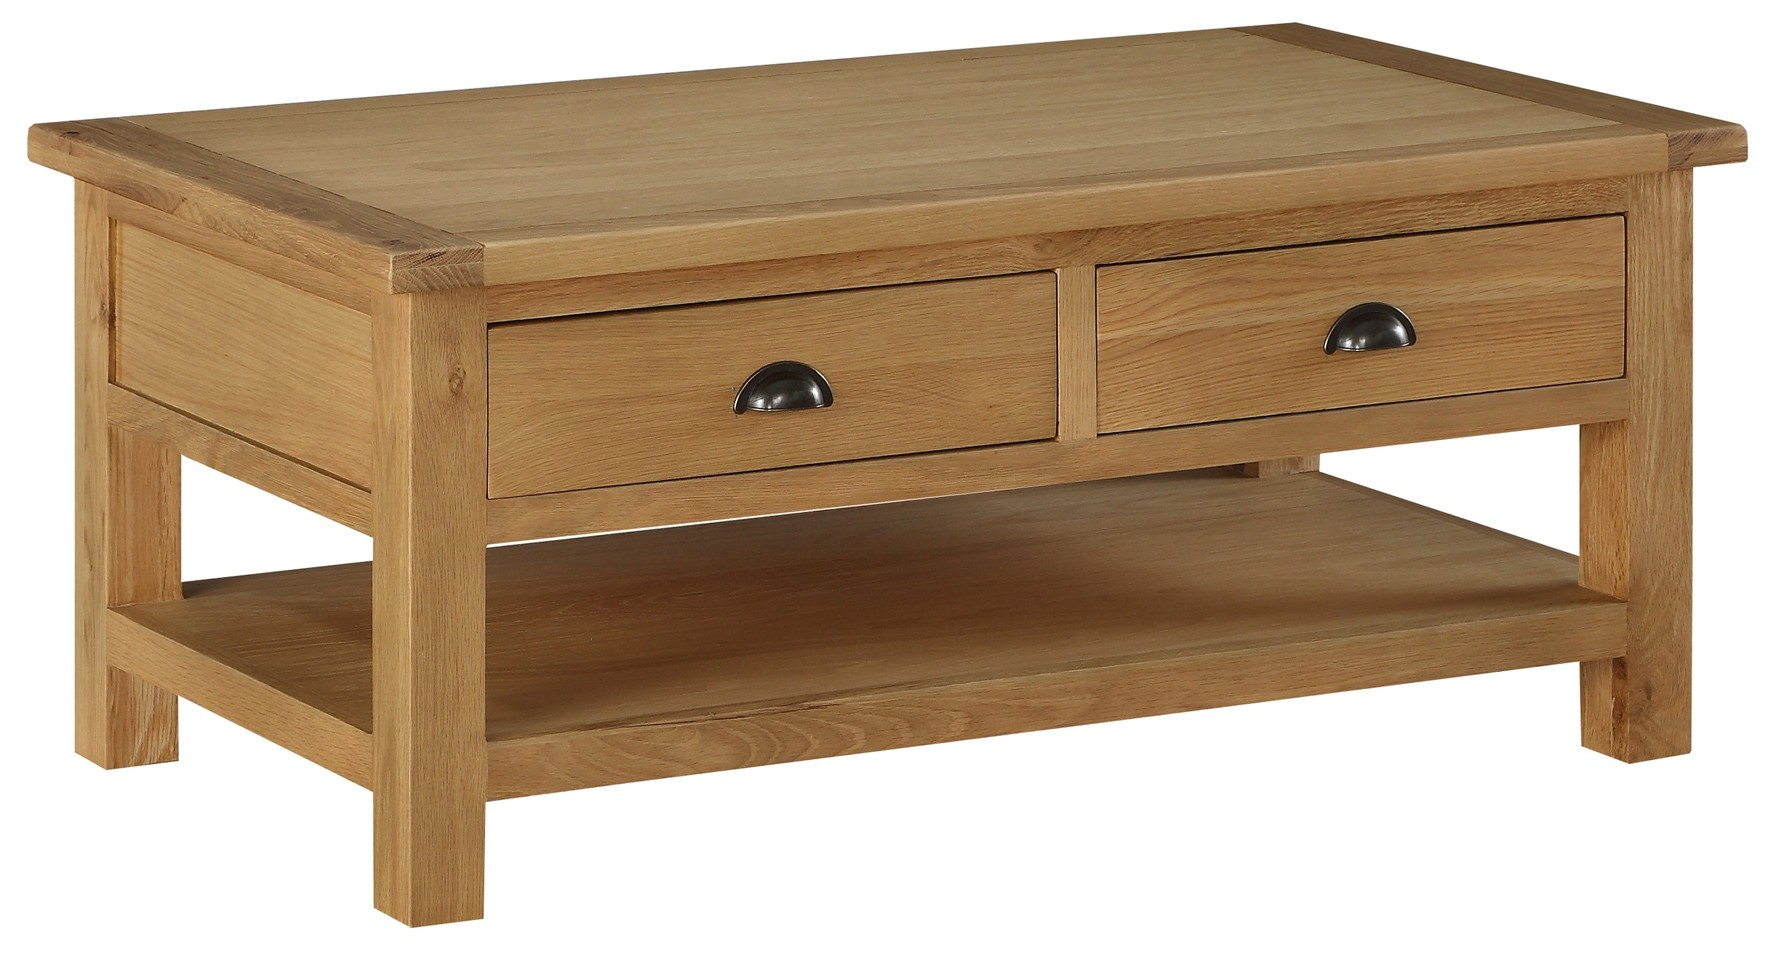 Sweet Dreams Kielder Solid Oak Coffee Table With 2 Drawers From The inside dimensions 1772 X 955